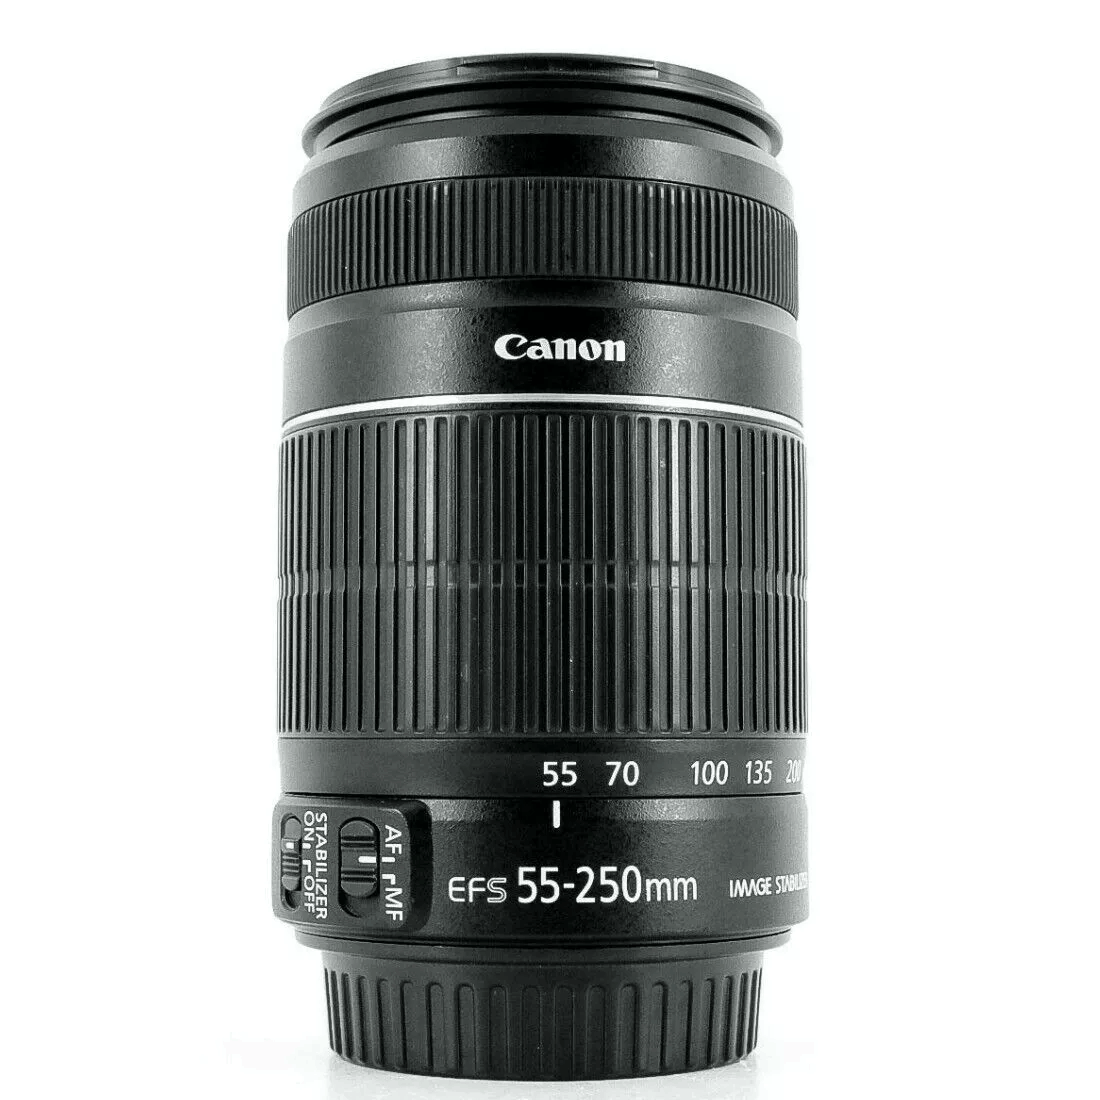 Shop Used Canon EF-S 55-250mm f/4.0-5.6 IS Telephoto Zoom Lens at 